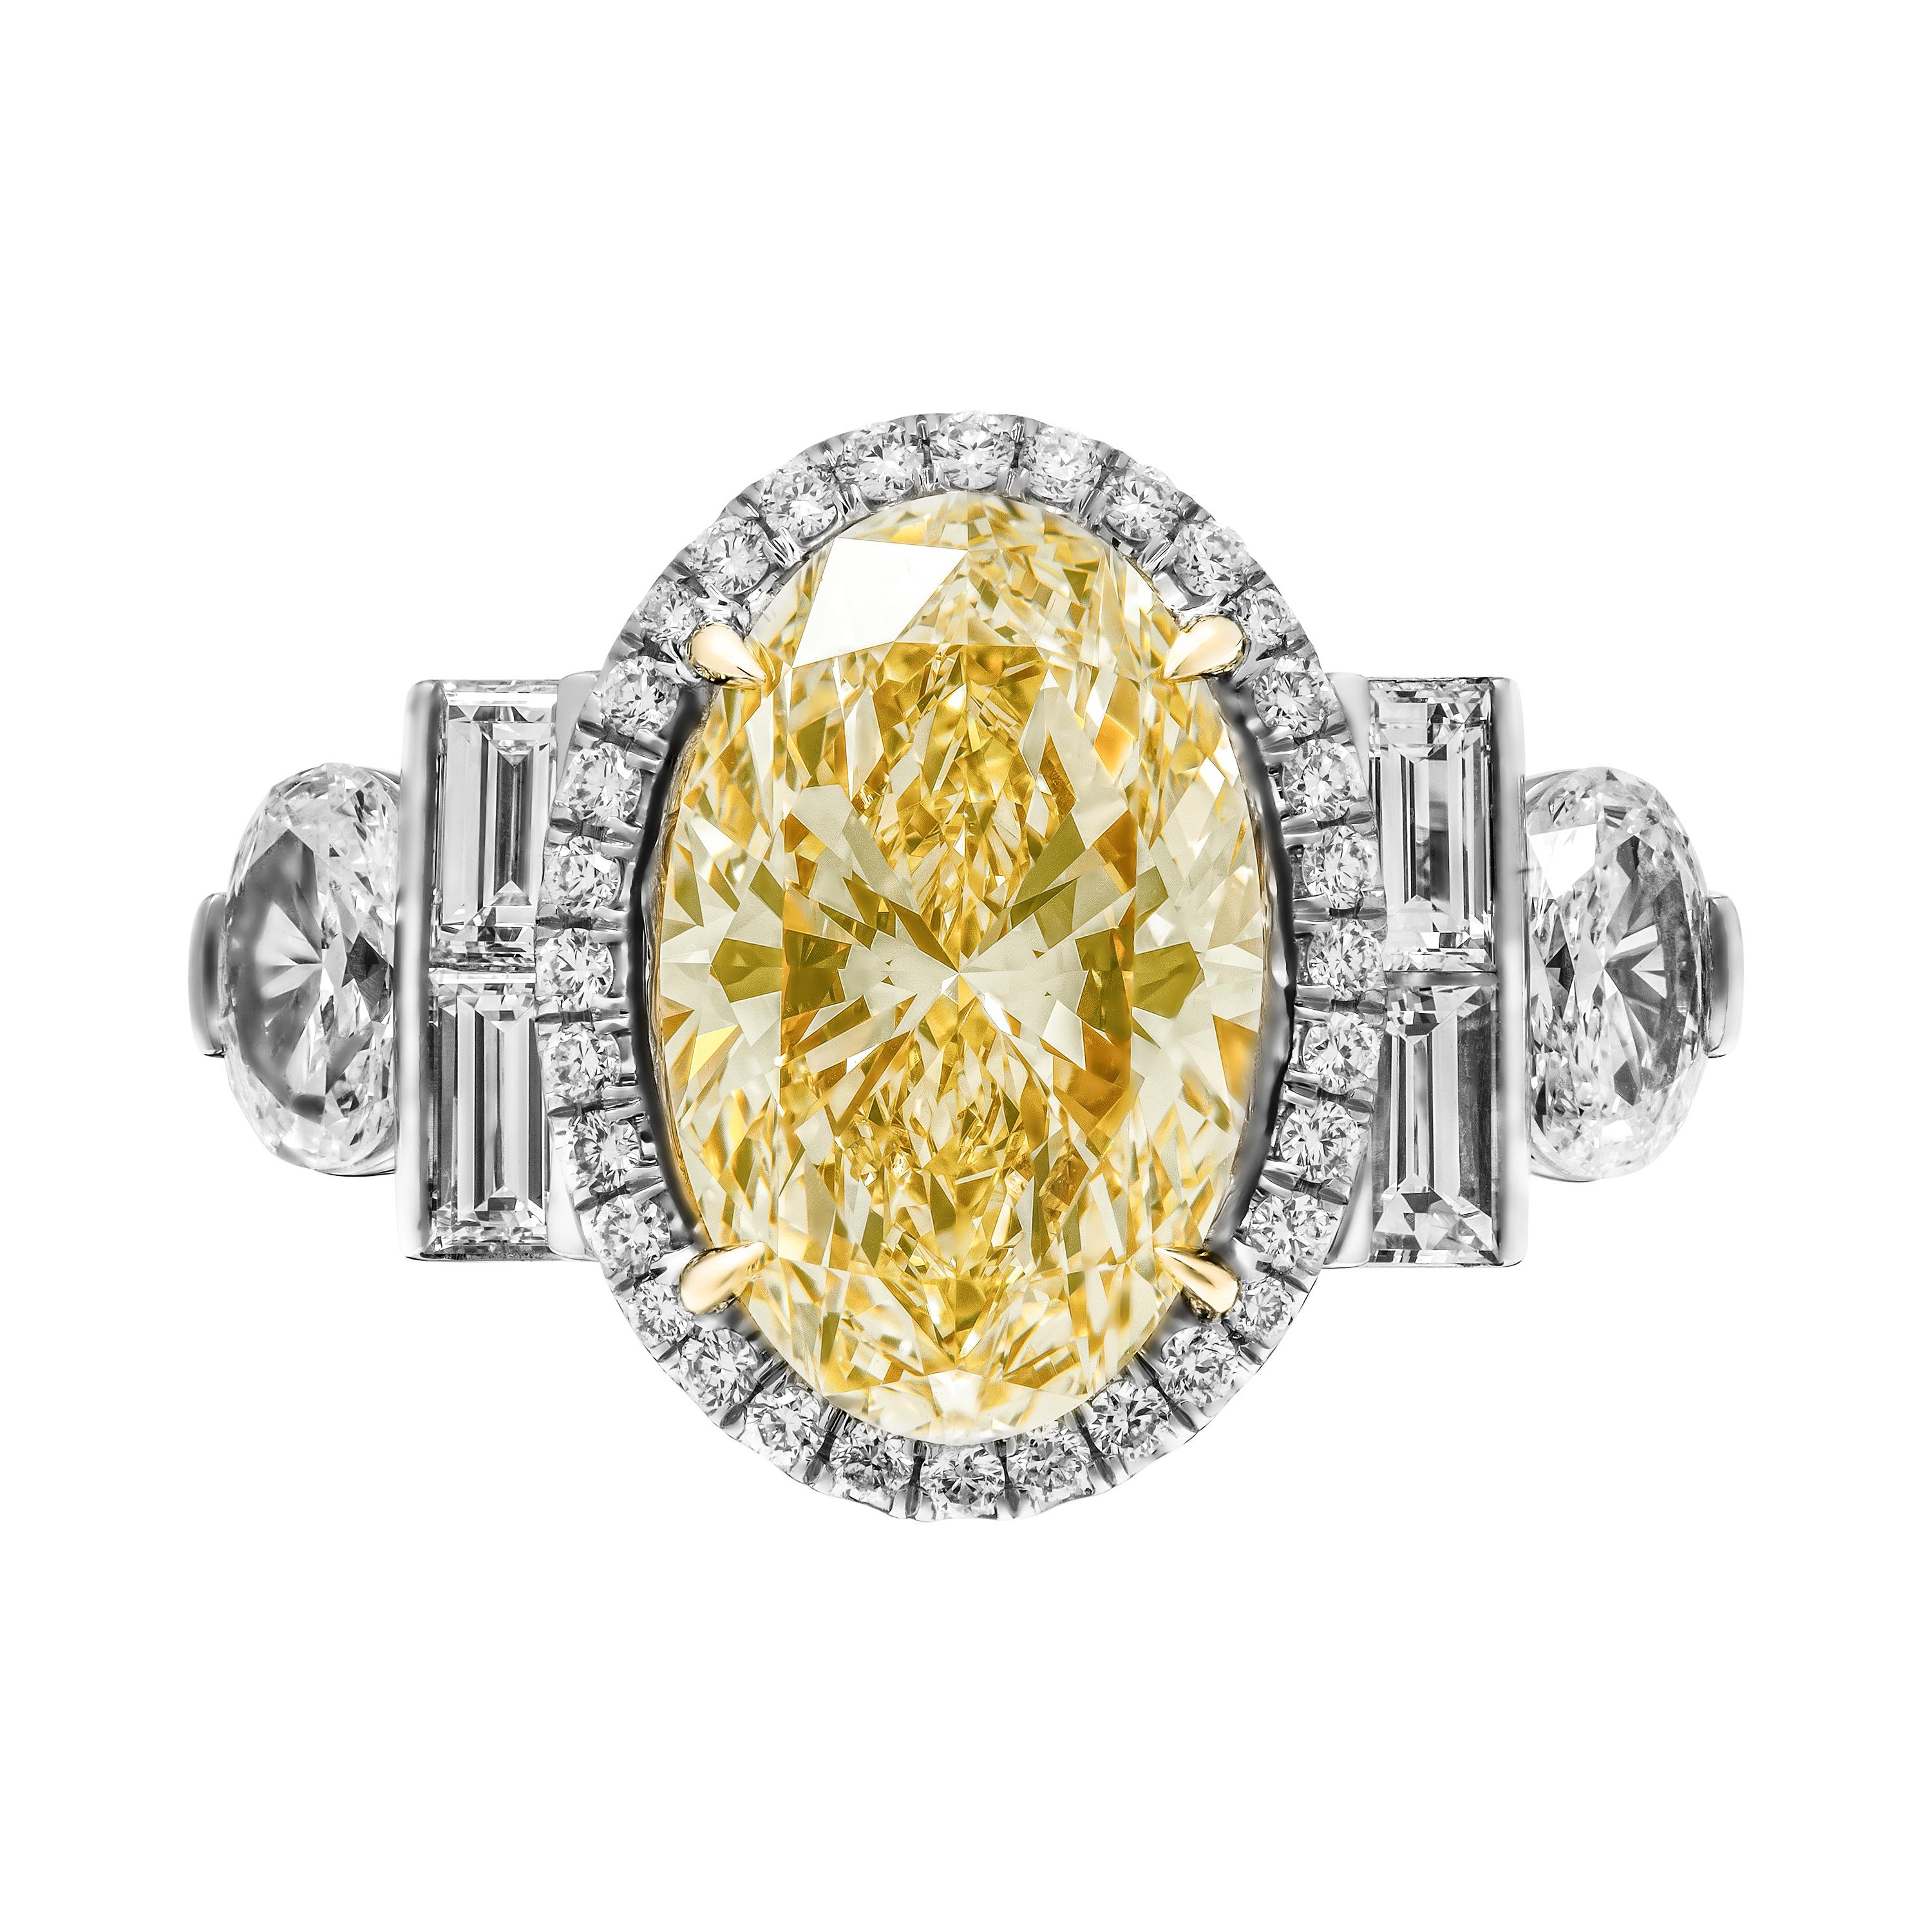 Mounted in handmade custom design setting featuring Platinum 950 & 22k Yellow Gold, 1 row of diamonds on the shank and fancy diamond U shape gallery under each stone, a true piece of art
Halo around center stone makes it appear larger and high end.